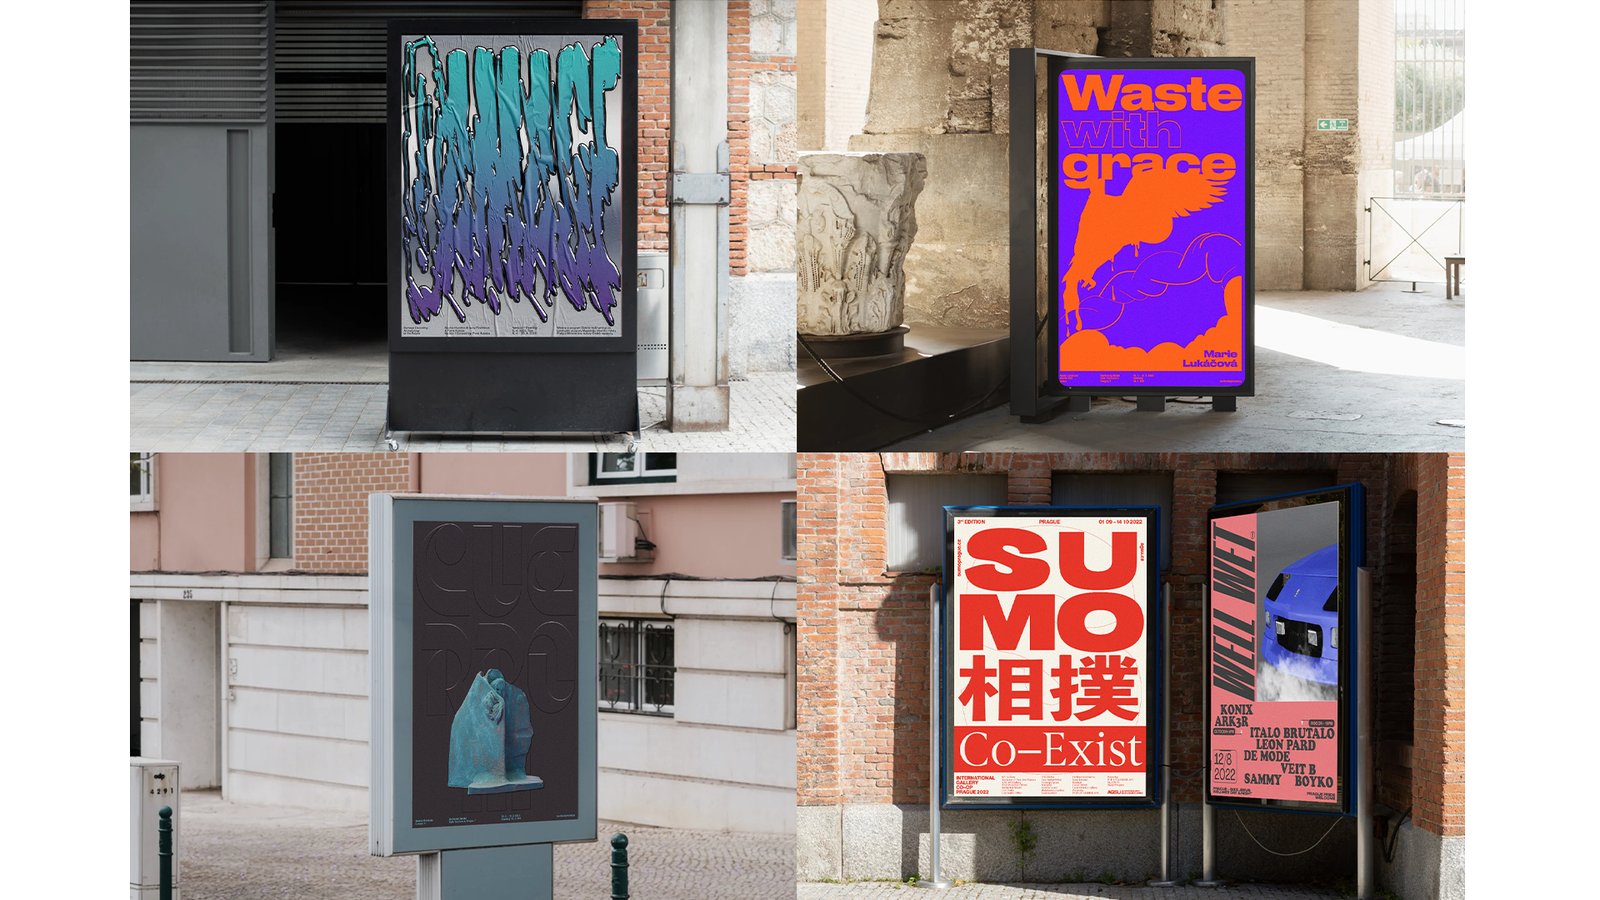 Exhibition posters